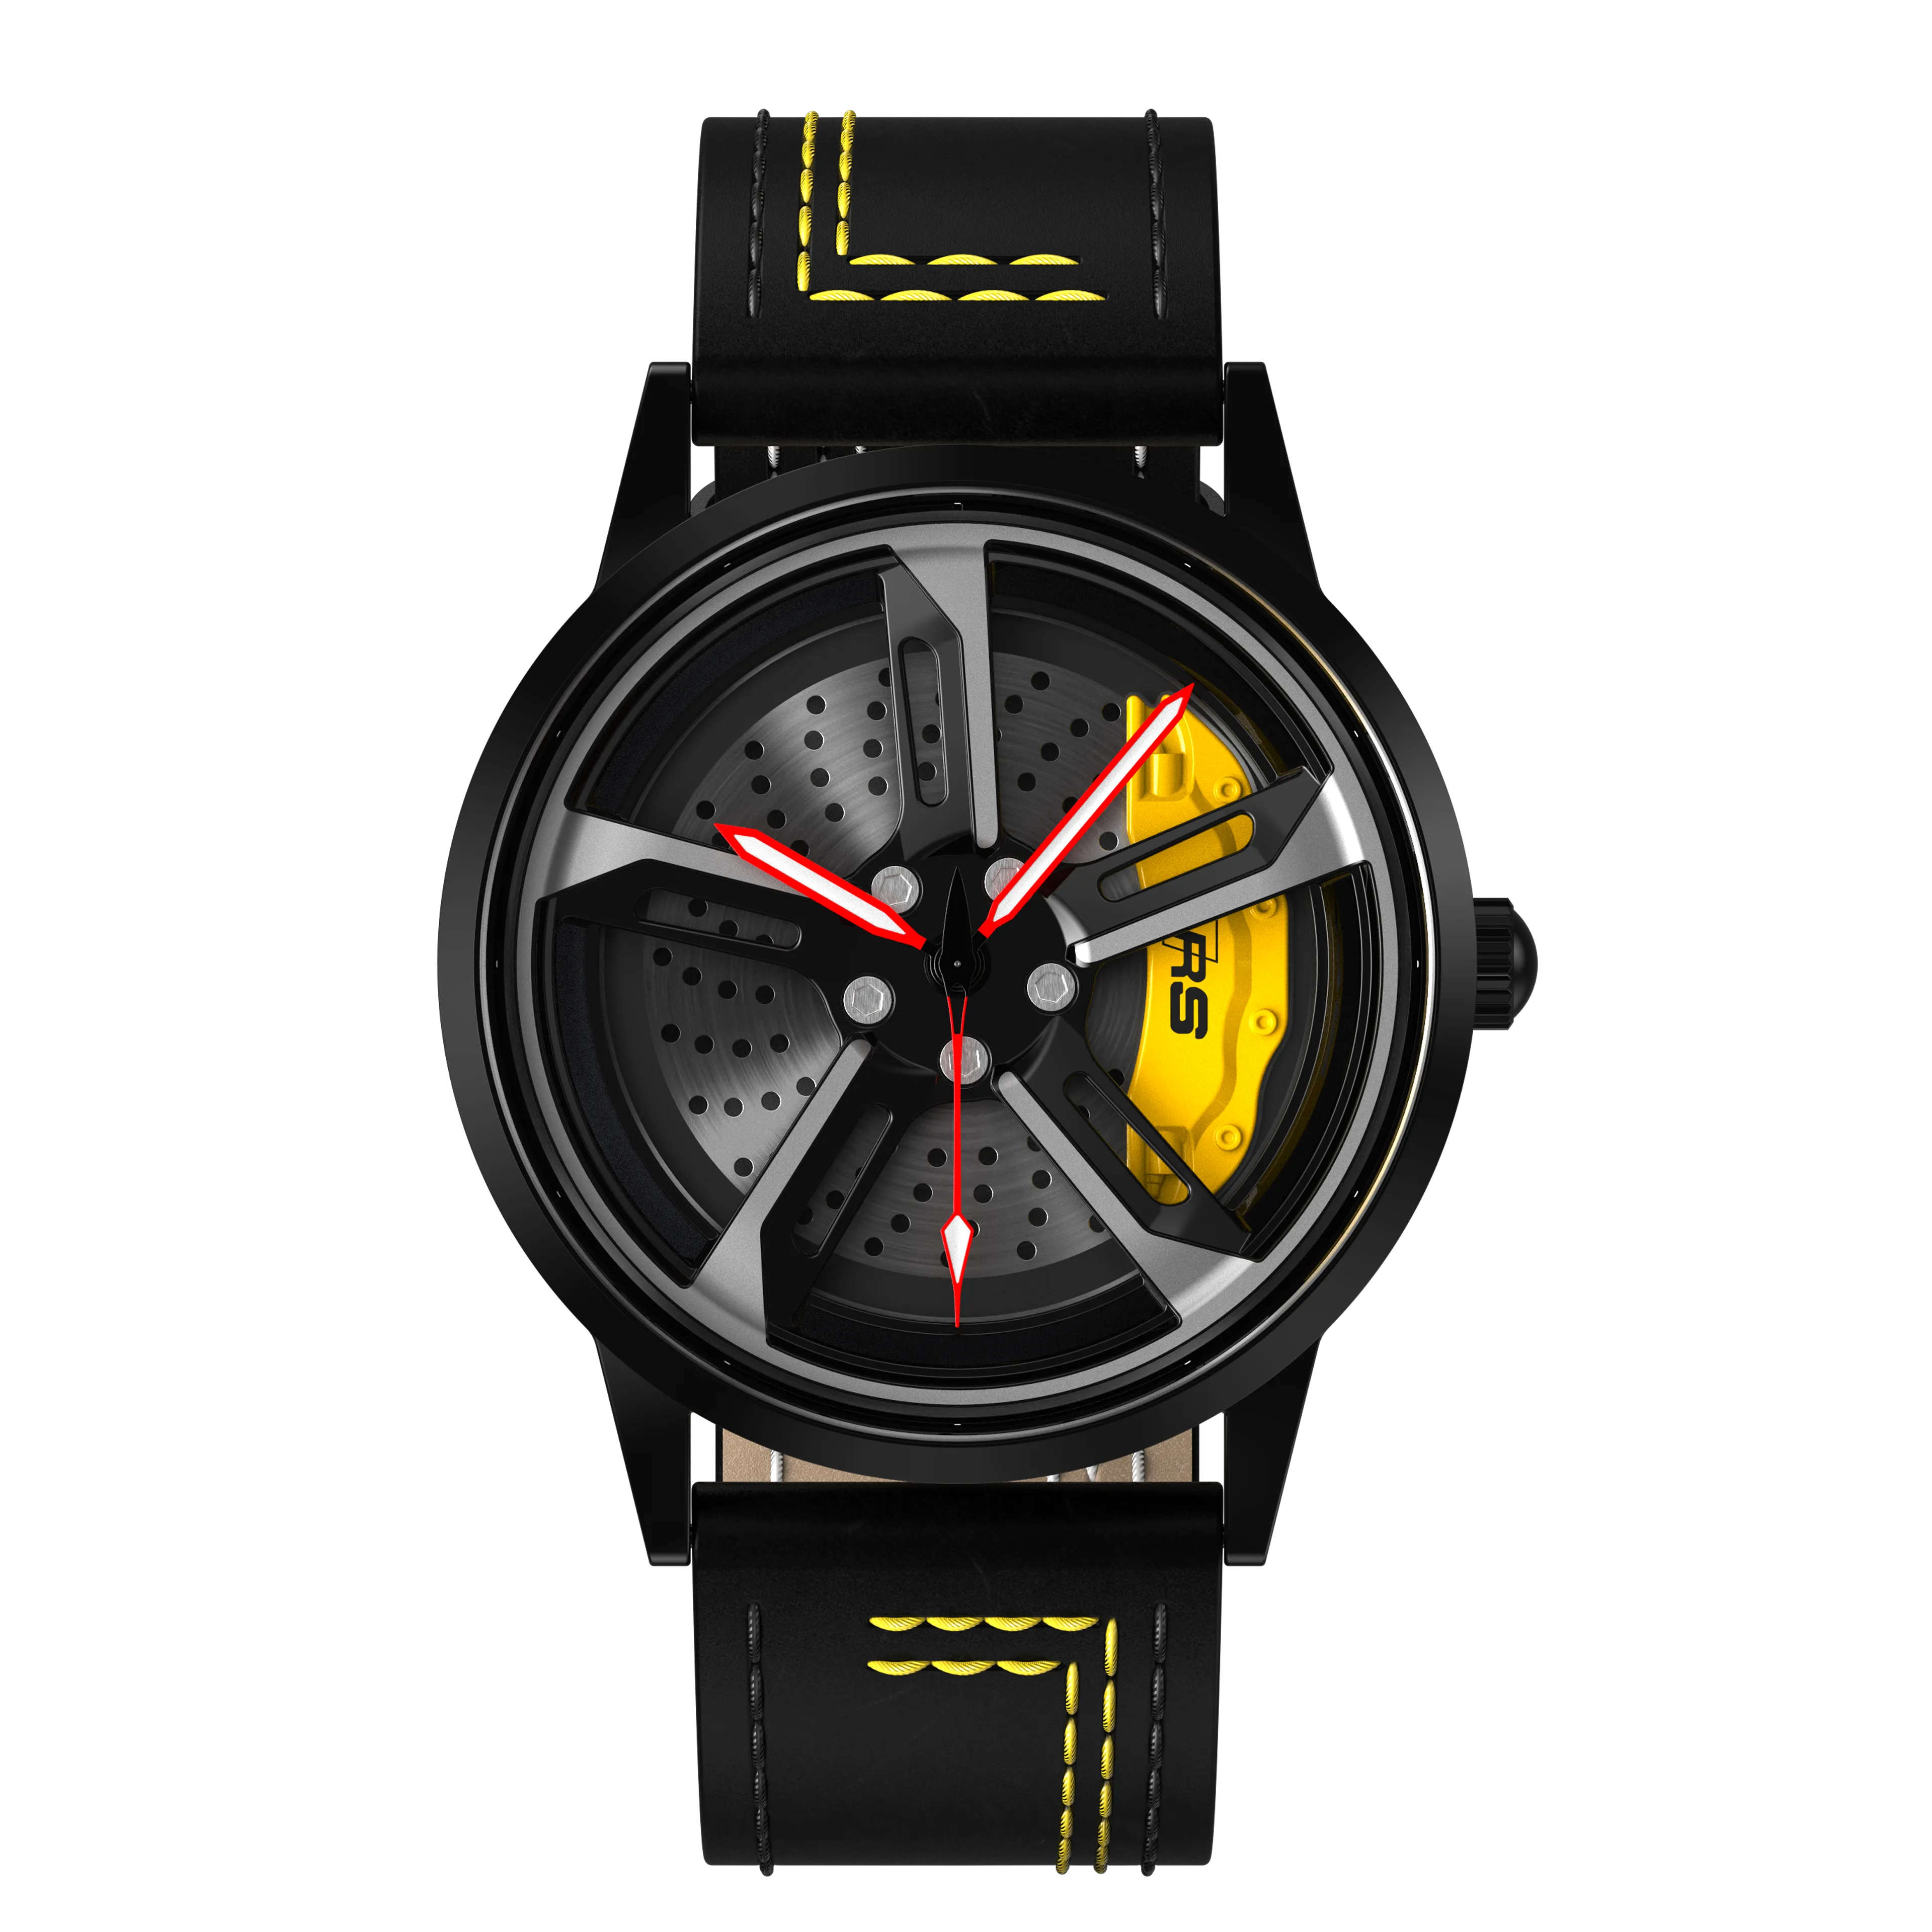 Shop Yellow Vorsprung RS7 Gyro - Yellow Leather Strap | RS Chrono